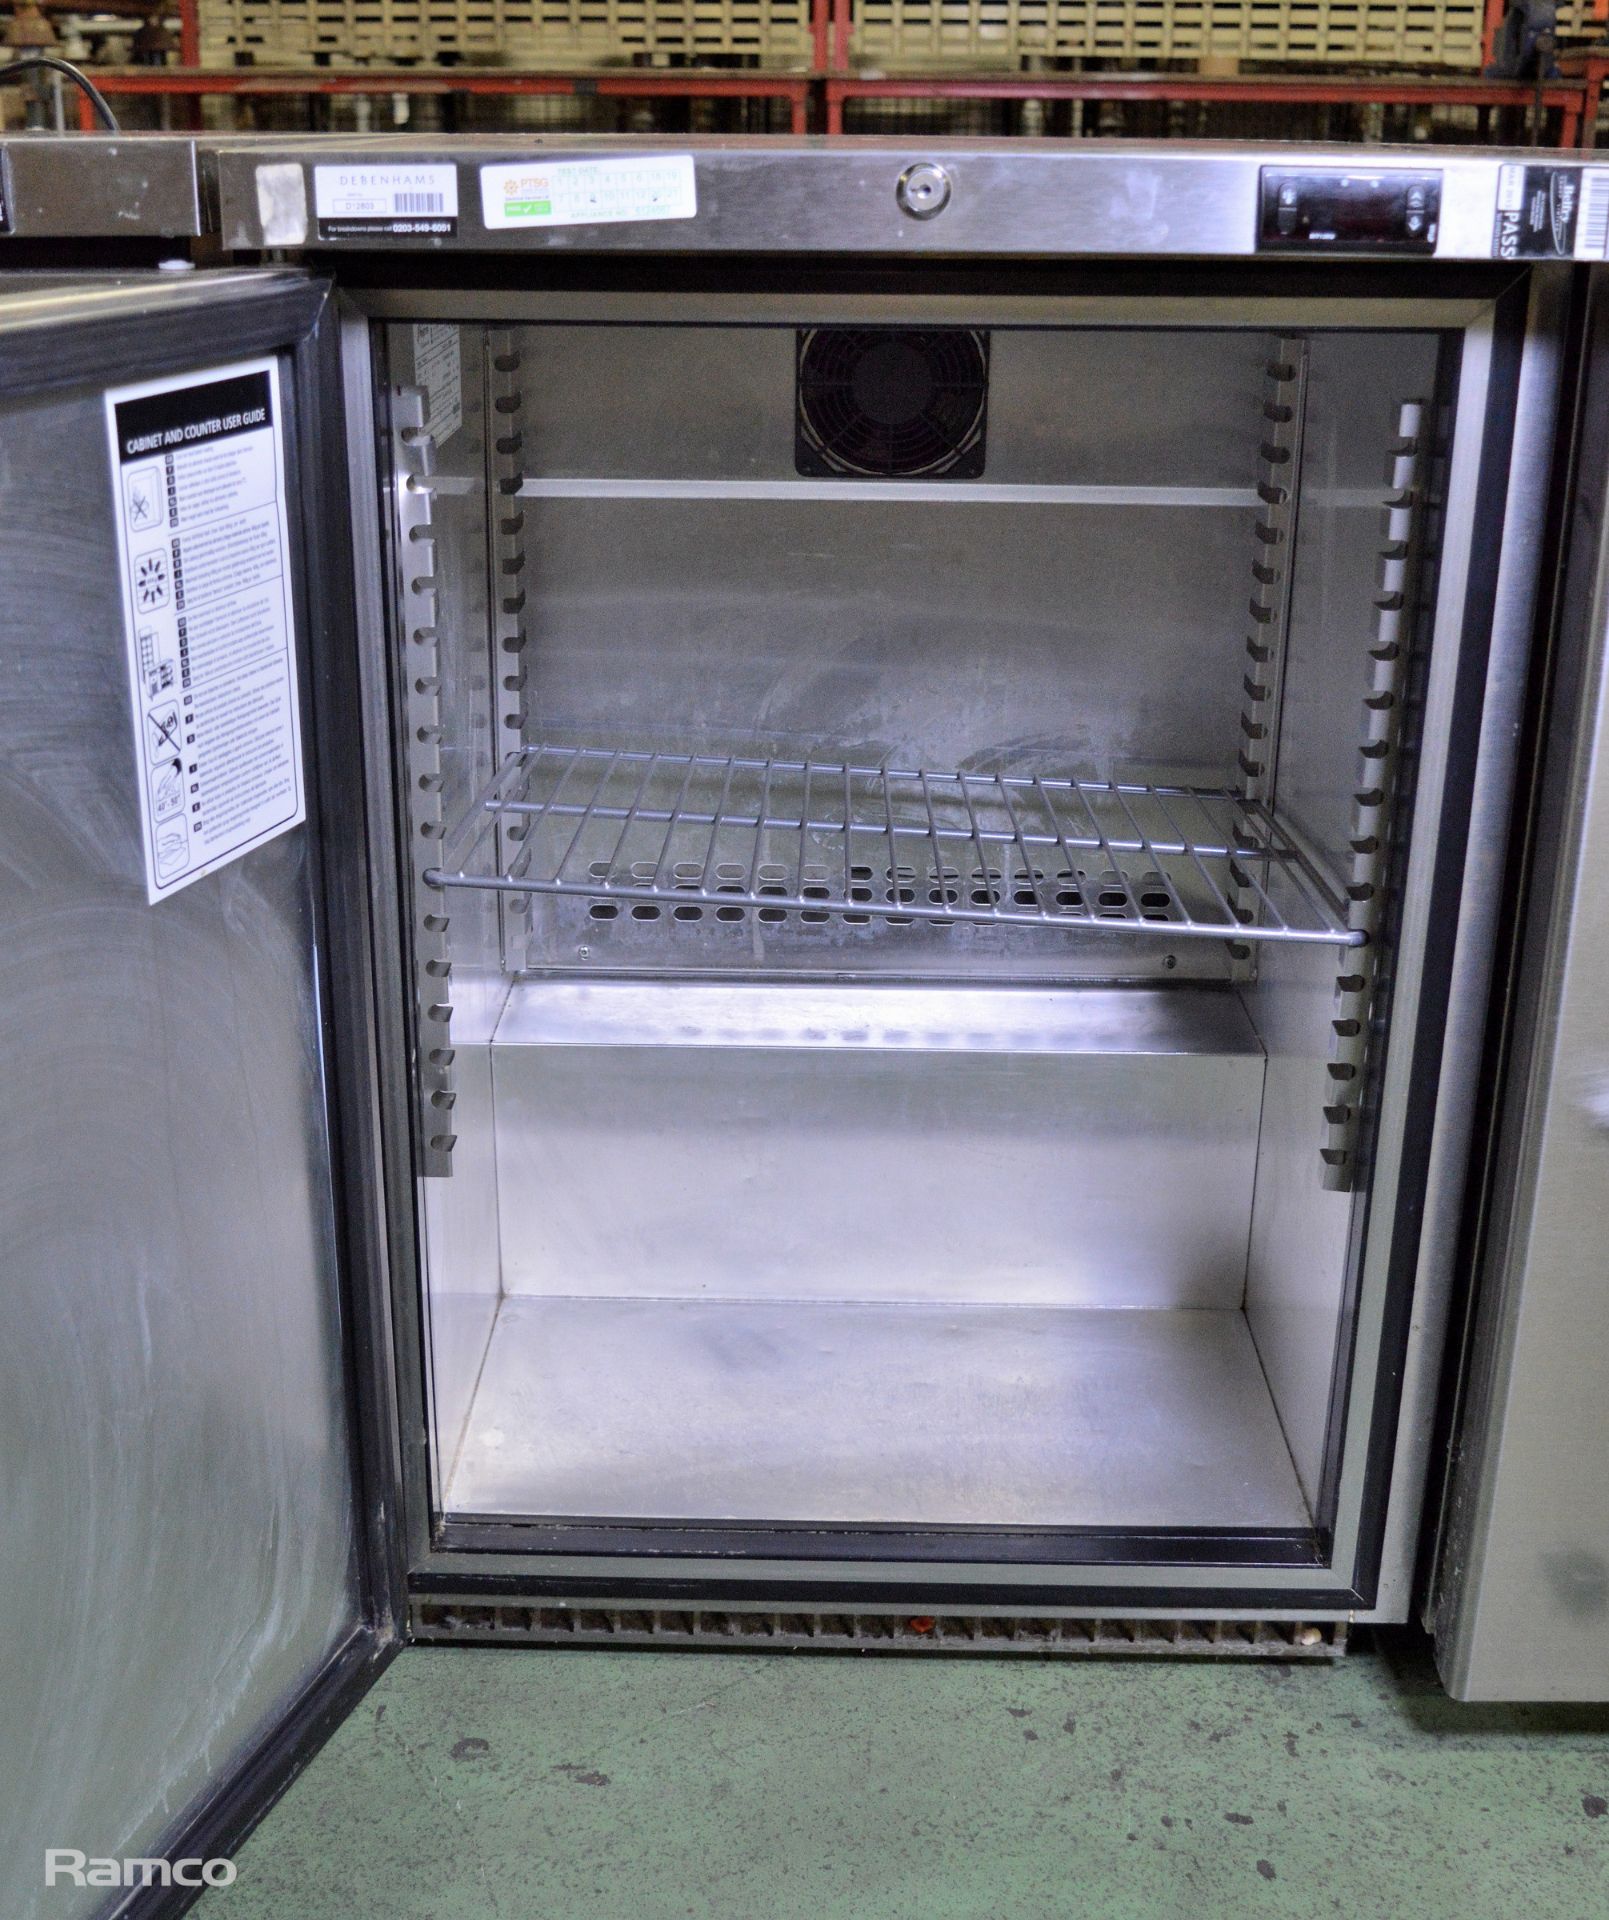 Foster HR150-A Stainless Stainless Fridge Unit - L600 x W640 x H820mm - Image 2 of 4